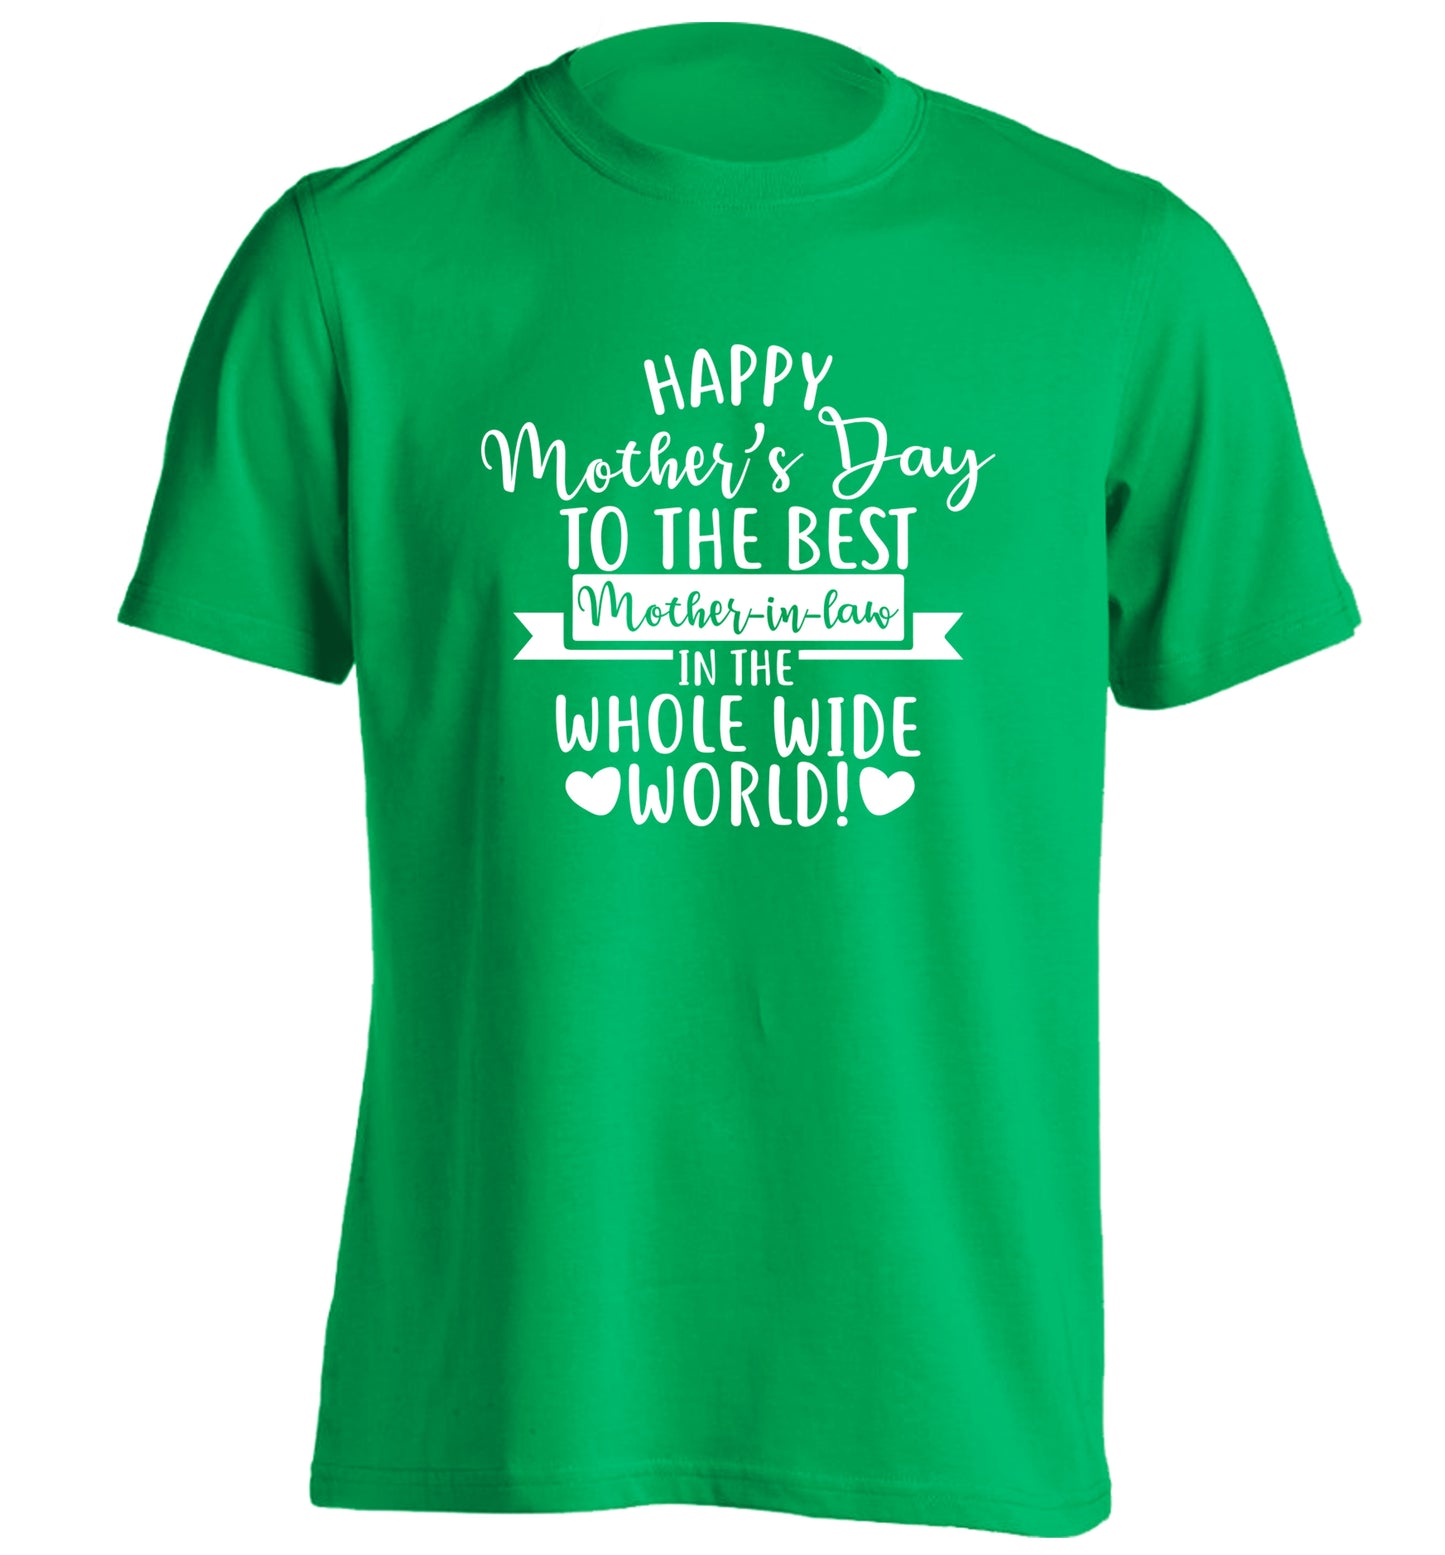 Happy mother's day to the best mother-in-law in the world adults unisex green Tshirt 2XL